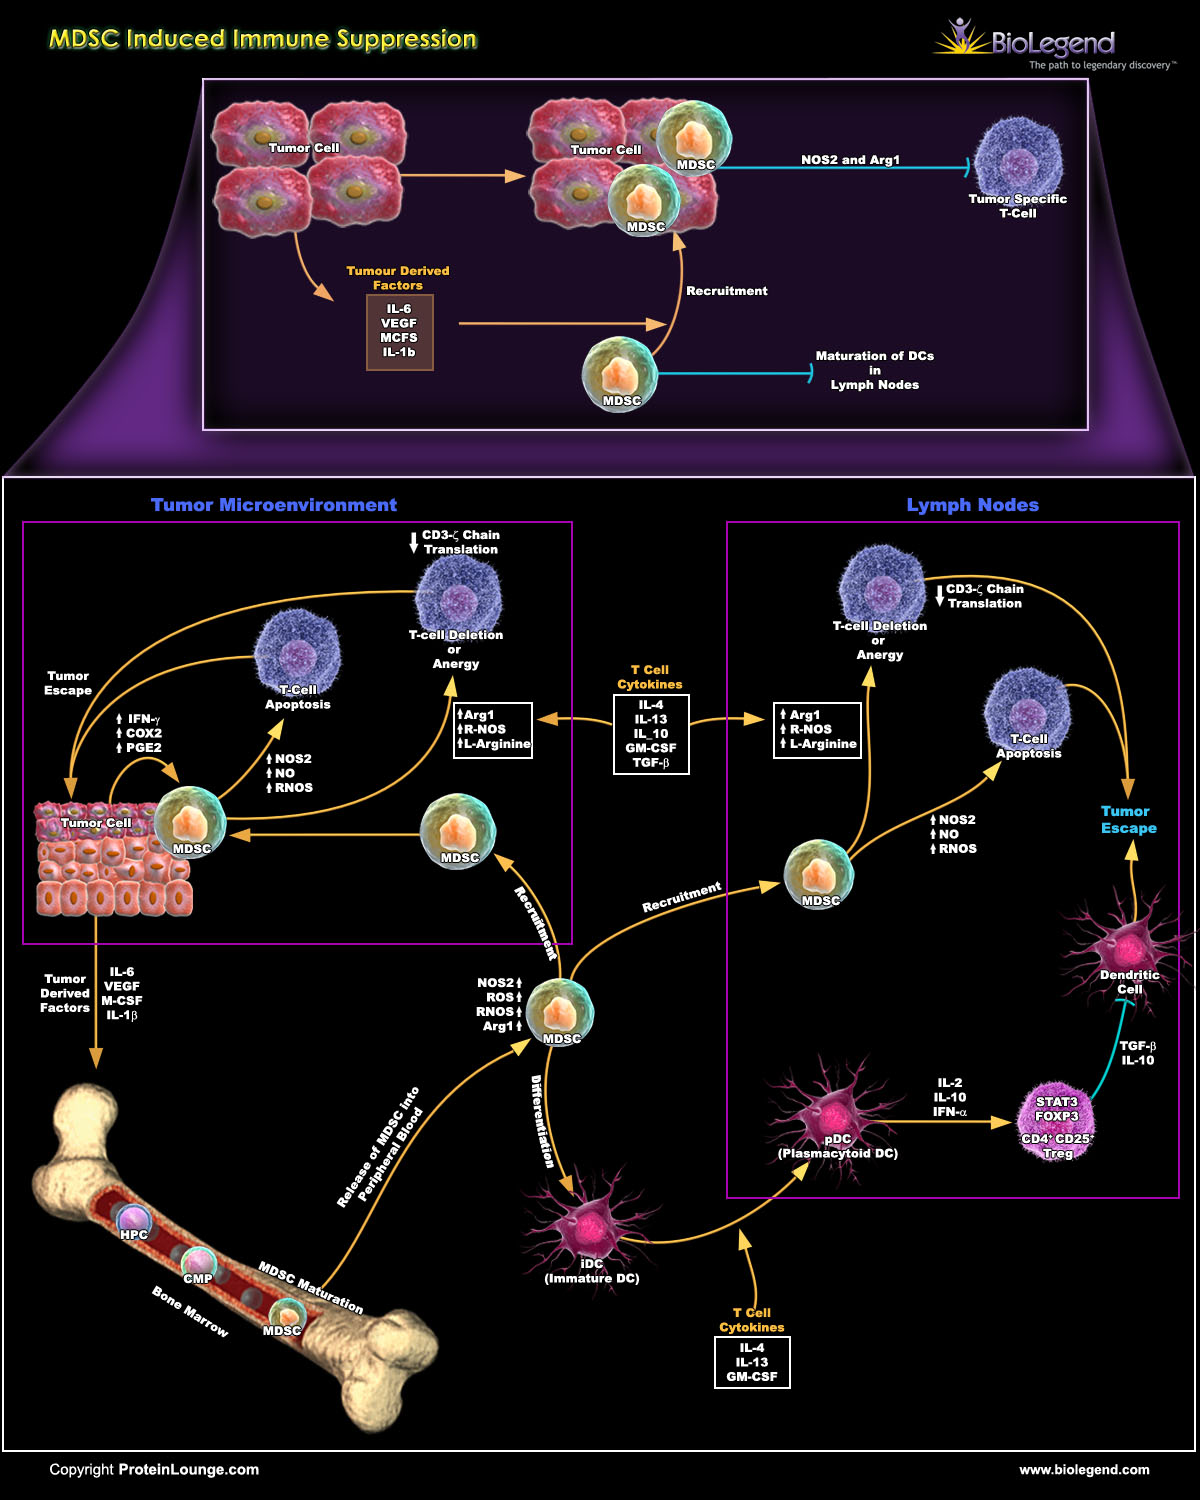 MDSC-induced Immune Suppression scientific pathway and products from BioLegend